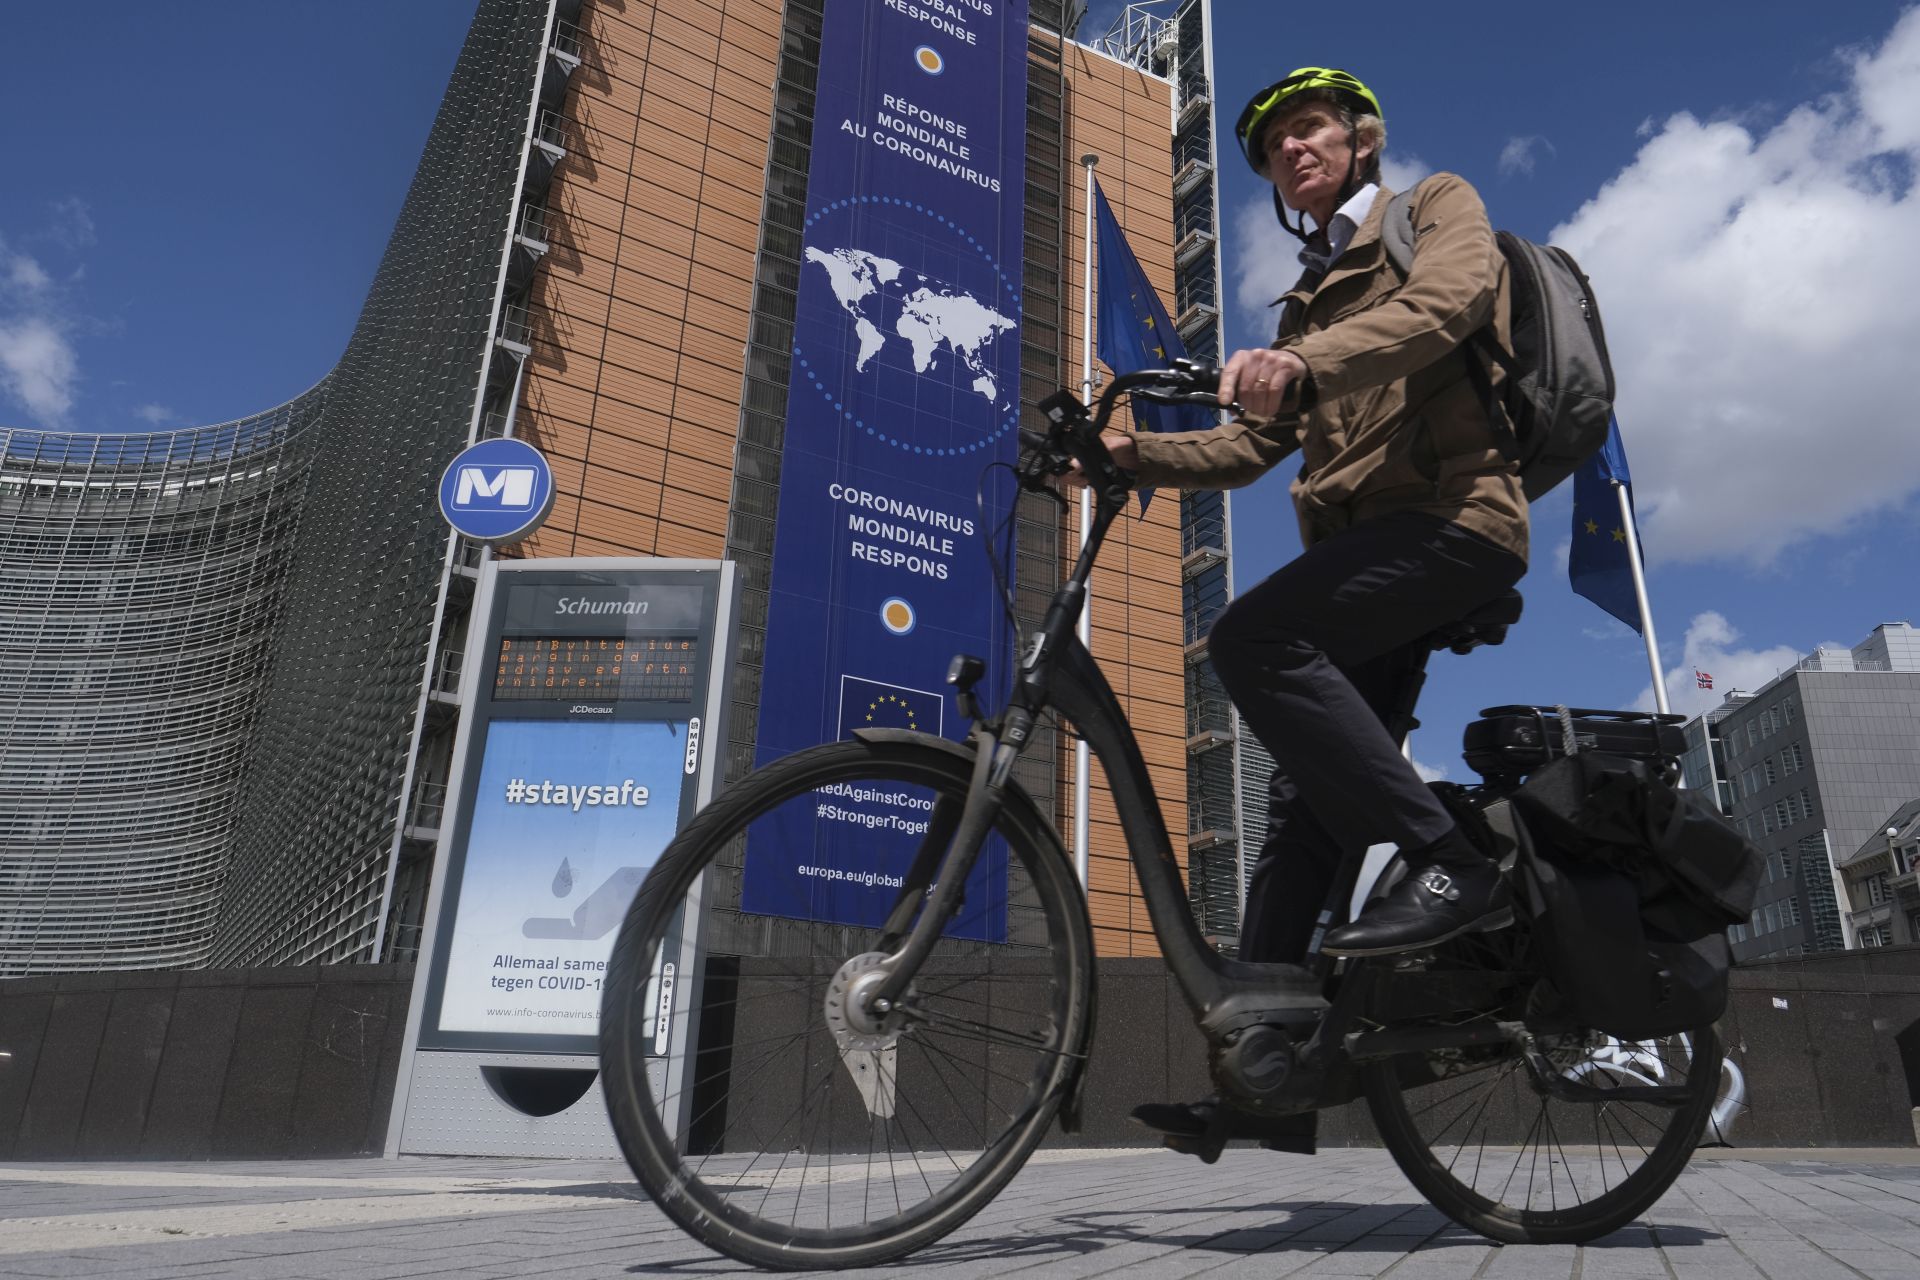 epa08393512 A cyclist passes in front of a new banner about the coronavirus global response in front of the European Commission headquarters in Brussels, Belgium, 30 April 2020. In order to contain the spread of COVID-19, Belgium is implementing confinement guidelines for the public which is scheduled to be in place until 04 May  2020. Only supermarkets and essential trade will remain open.  EPA/OLIVIER HOSLET